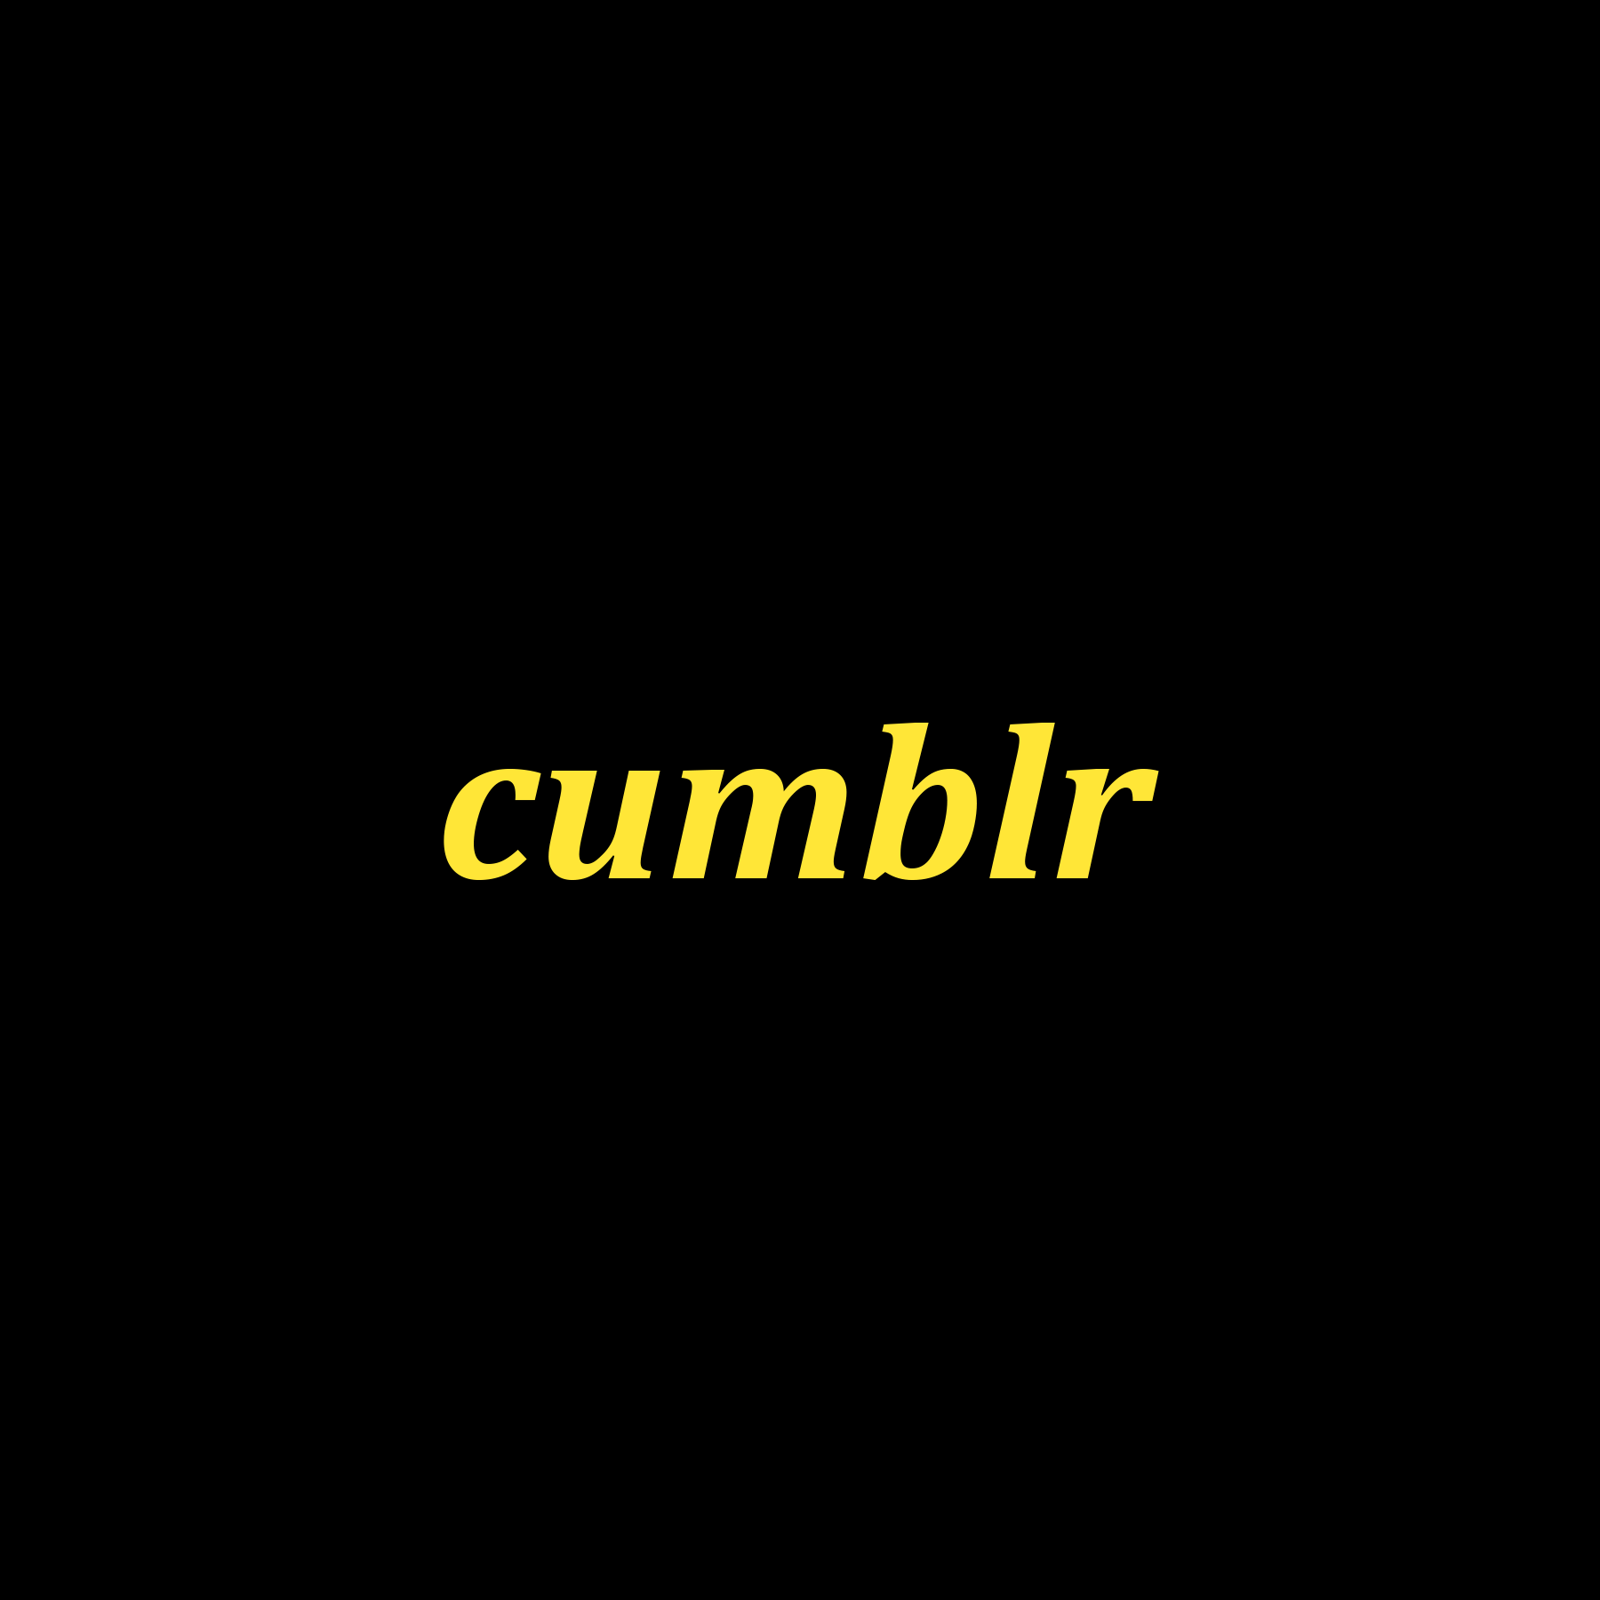 Photo by KujonBaby with the username @KujonBaby,  January 29, 2019 at 5:22 PM and the text says 'cumblr-com:
Attention all! We would like to tell you a little bit about who we are! We have had to stay quiet about some things but would like to tell you all about our community’s new home. Many of you may have seen our site already, and we want to let..'